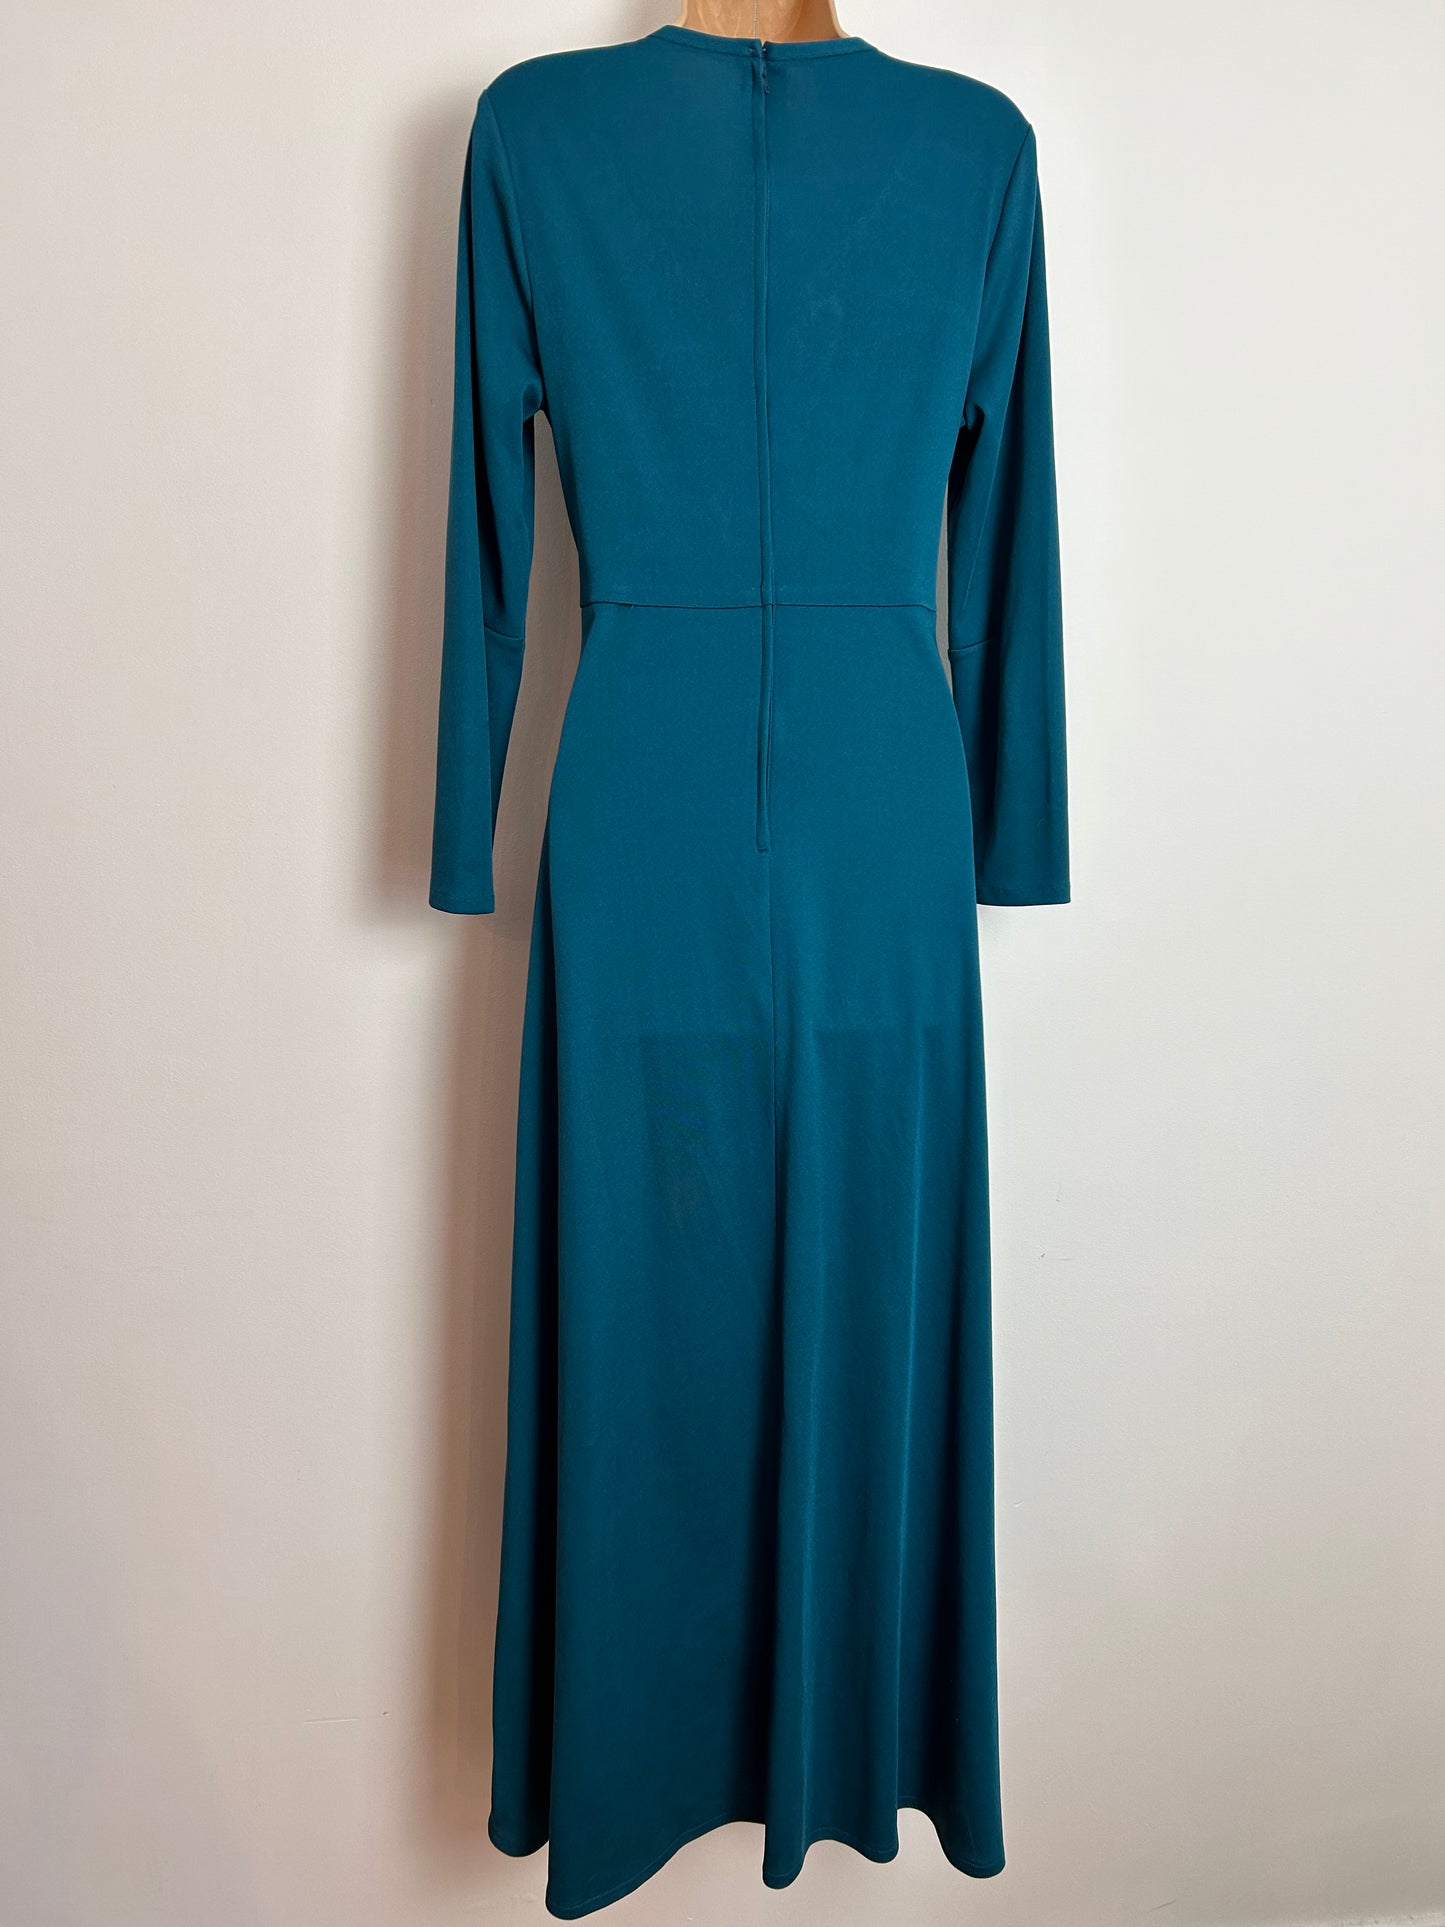 Vintage 1970s Approx UK Size 10-12 Teal Long Sleeve Plunge Neck Bow Detail Long Sleeve Boho Maxi Dress by Devonshire Lady